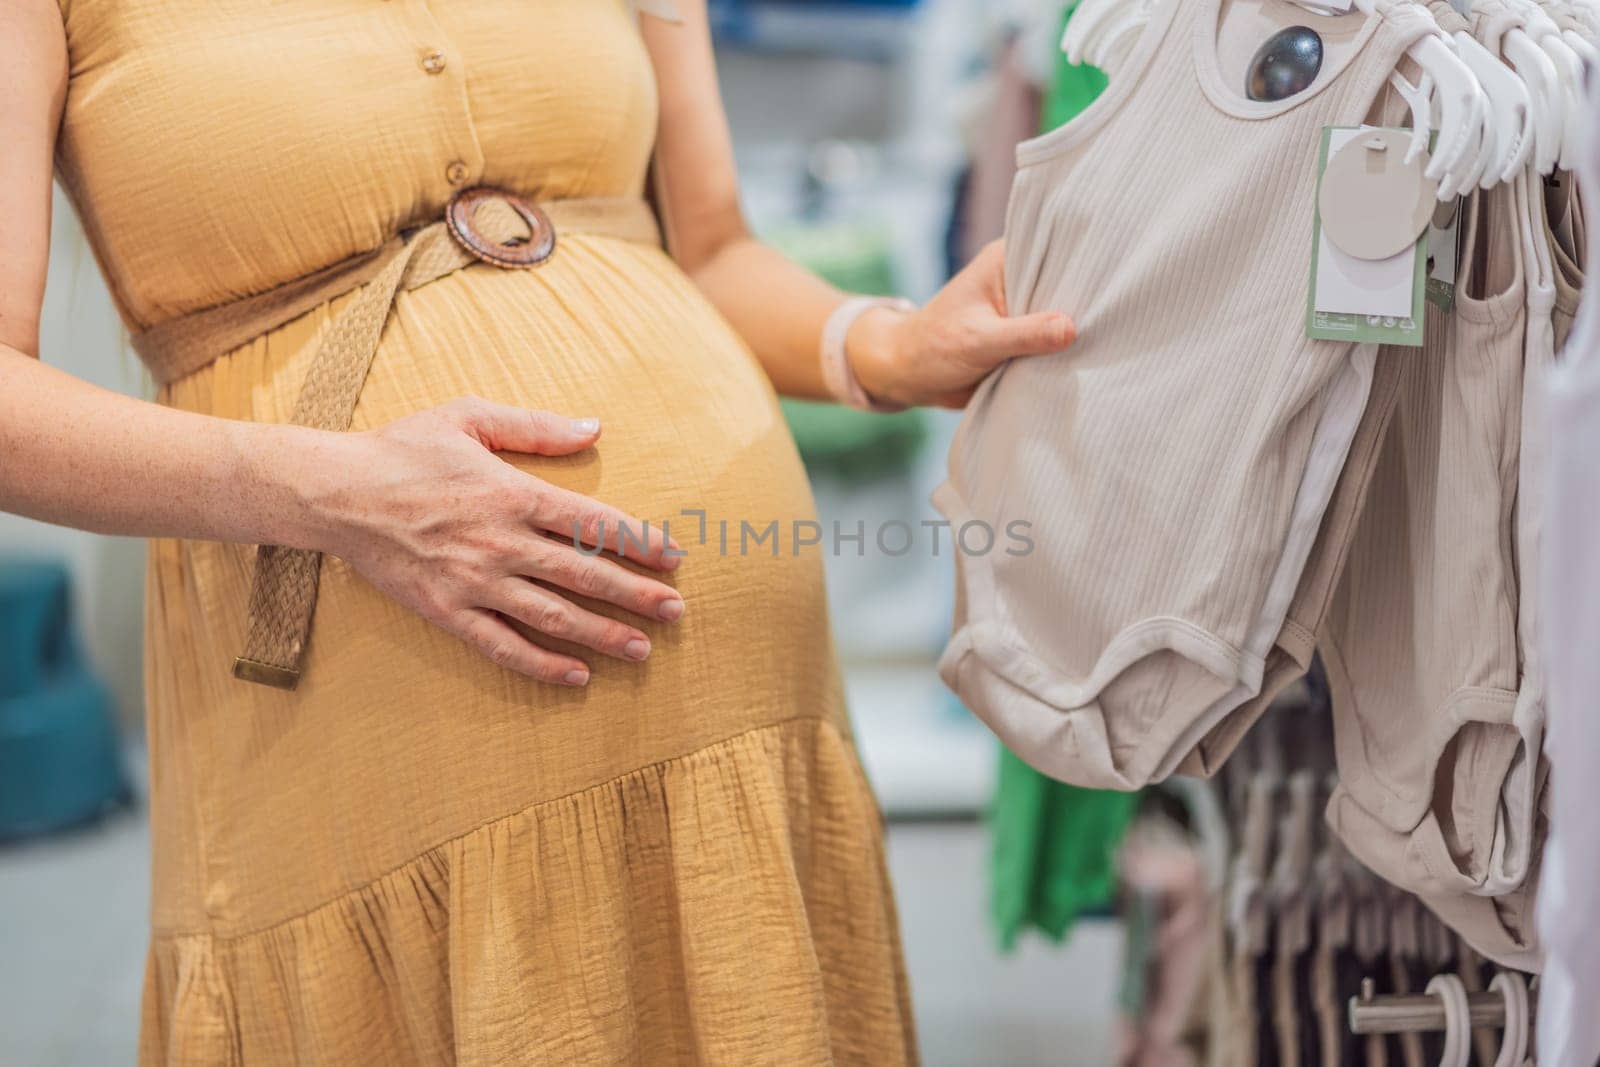 Expectant mother joyfully selects adorable clothes for her unborn baby while enjoying a shopping spree in the vibrant aisles of the shopping center.